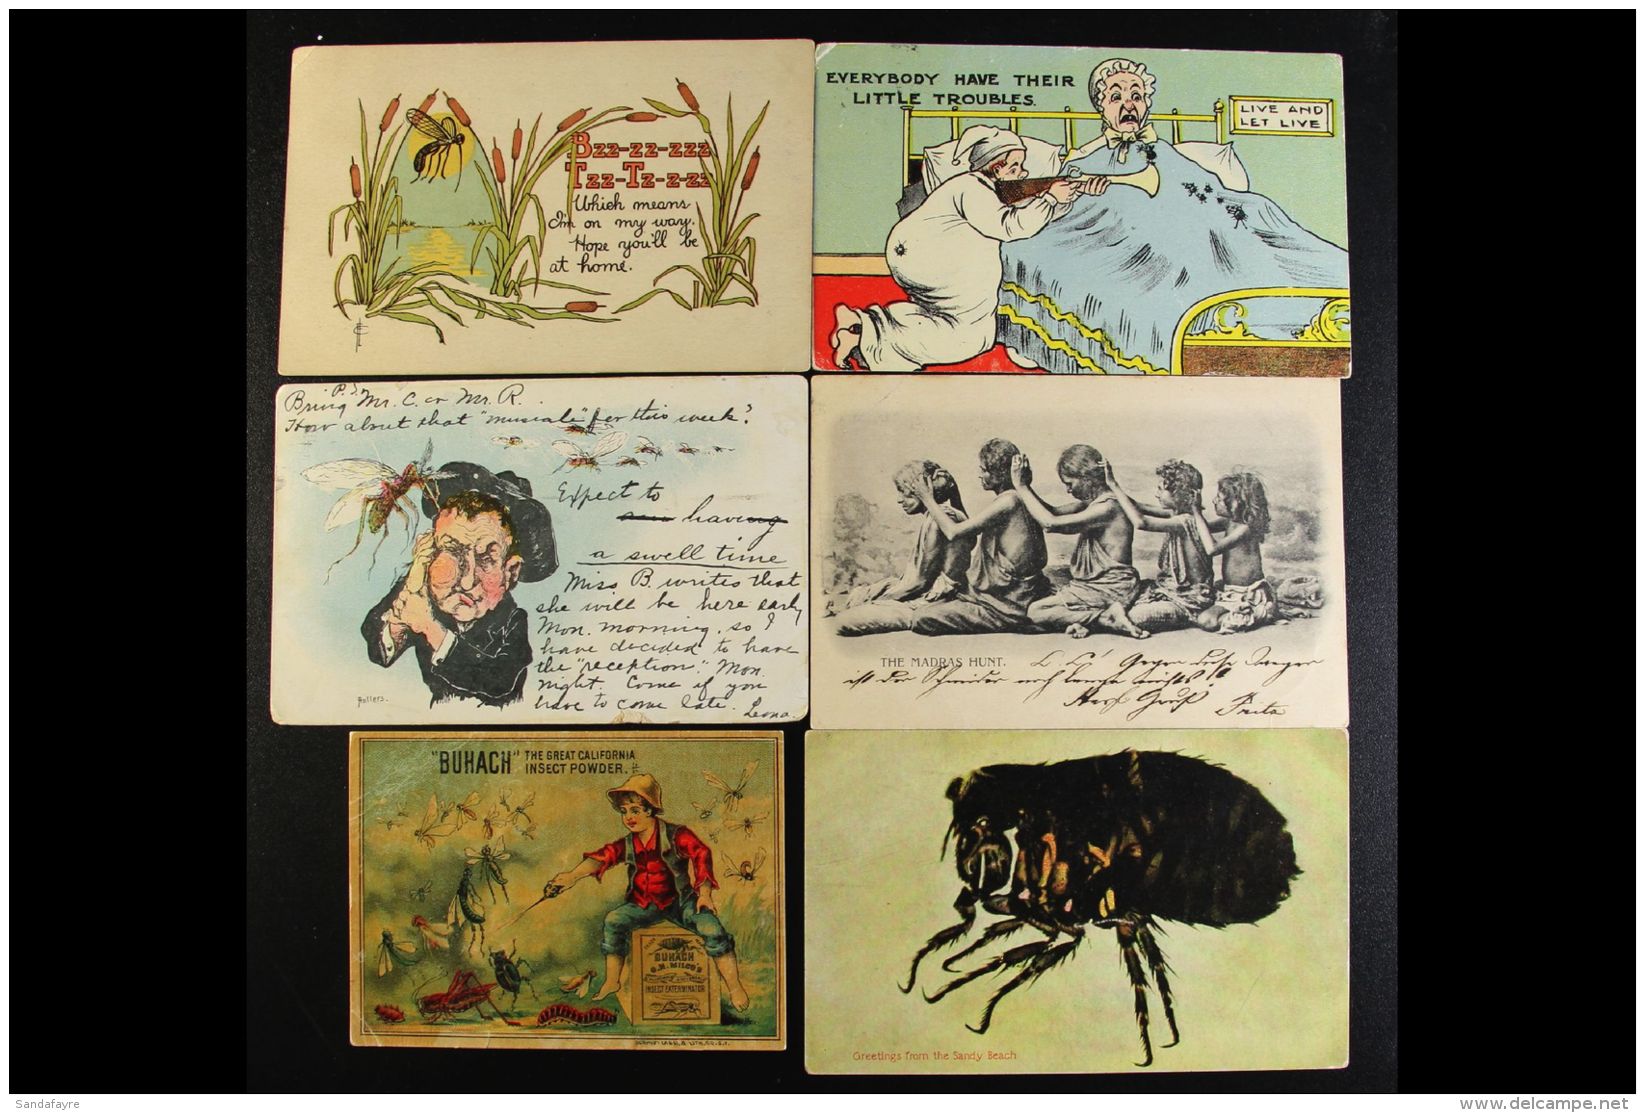 INSECTS An All Periods Worldwide Thematic Collection Of Postcards And Postal Stationery Ranging From Early 1900's... - Unclassified